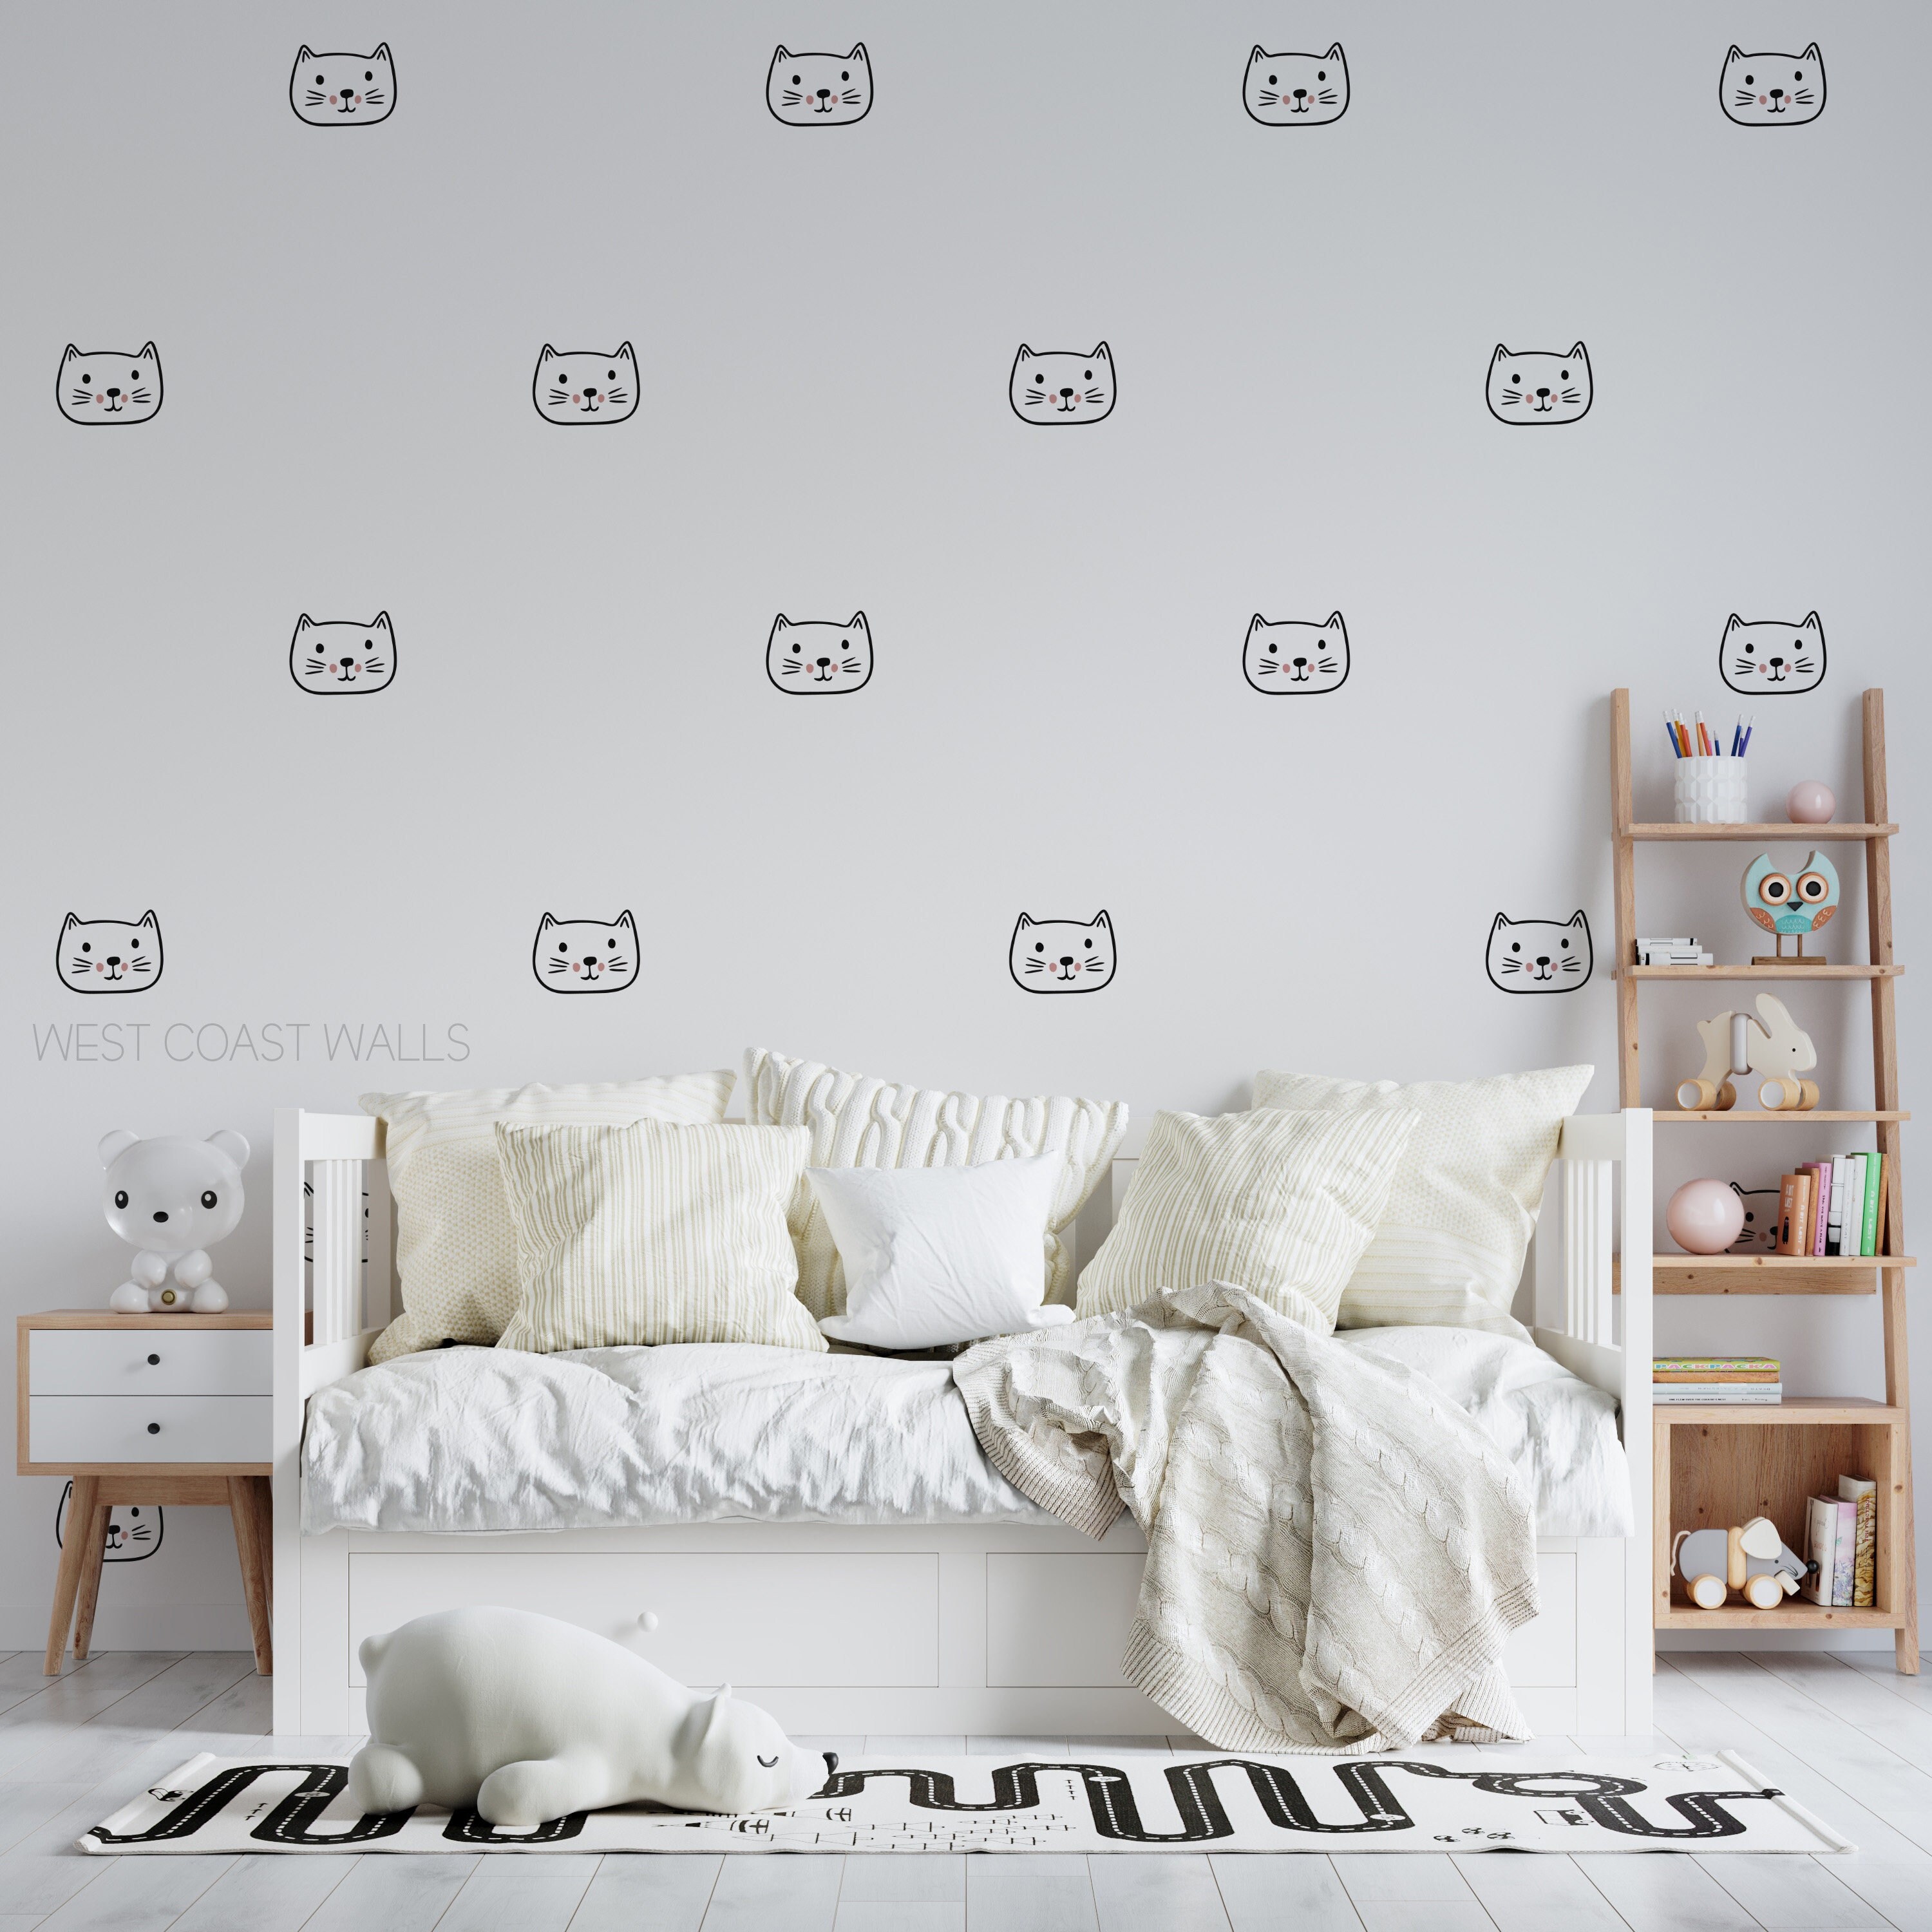 3D Acrylic Hello Kitty Wall Decoration Sticker for Baby Room, Bedroom, Game  Room, Etc. variation A 